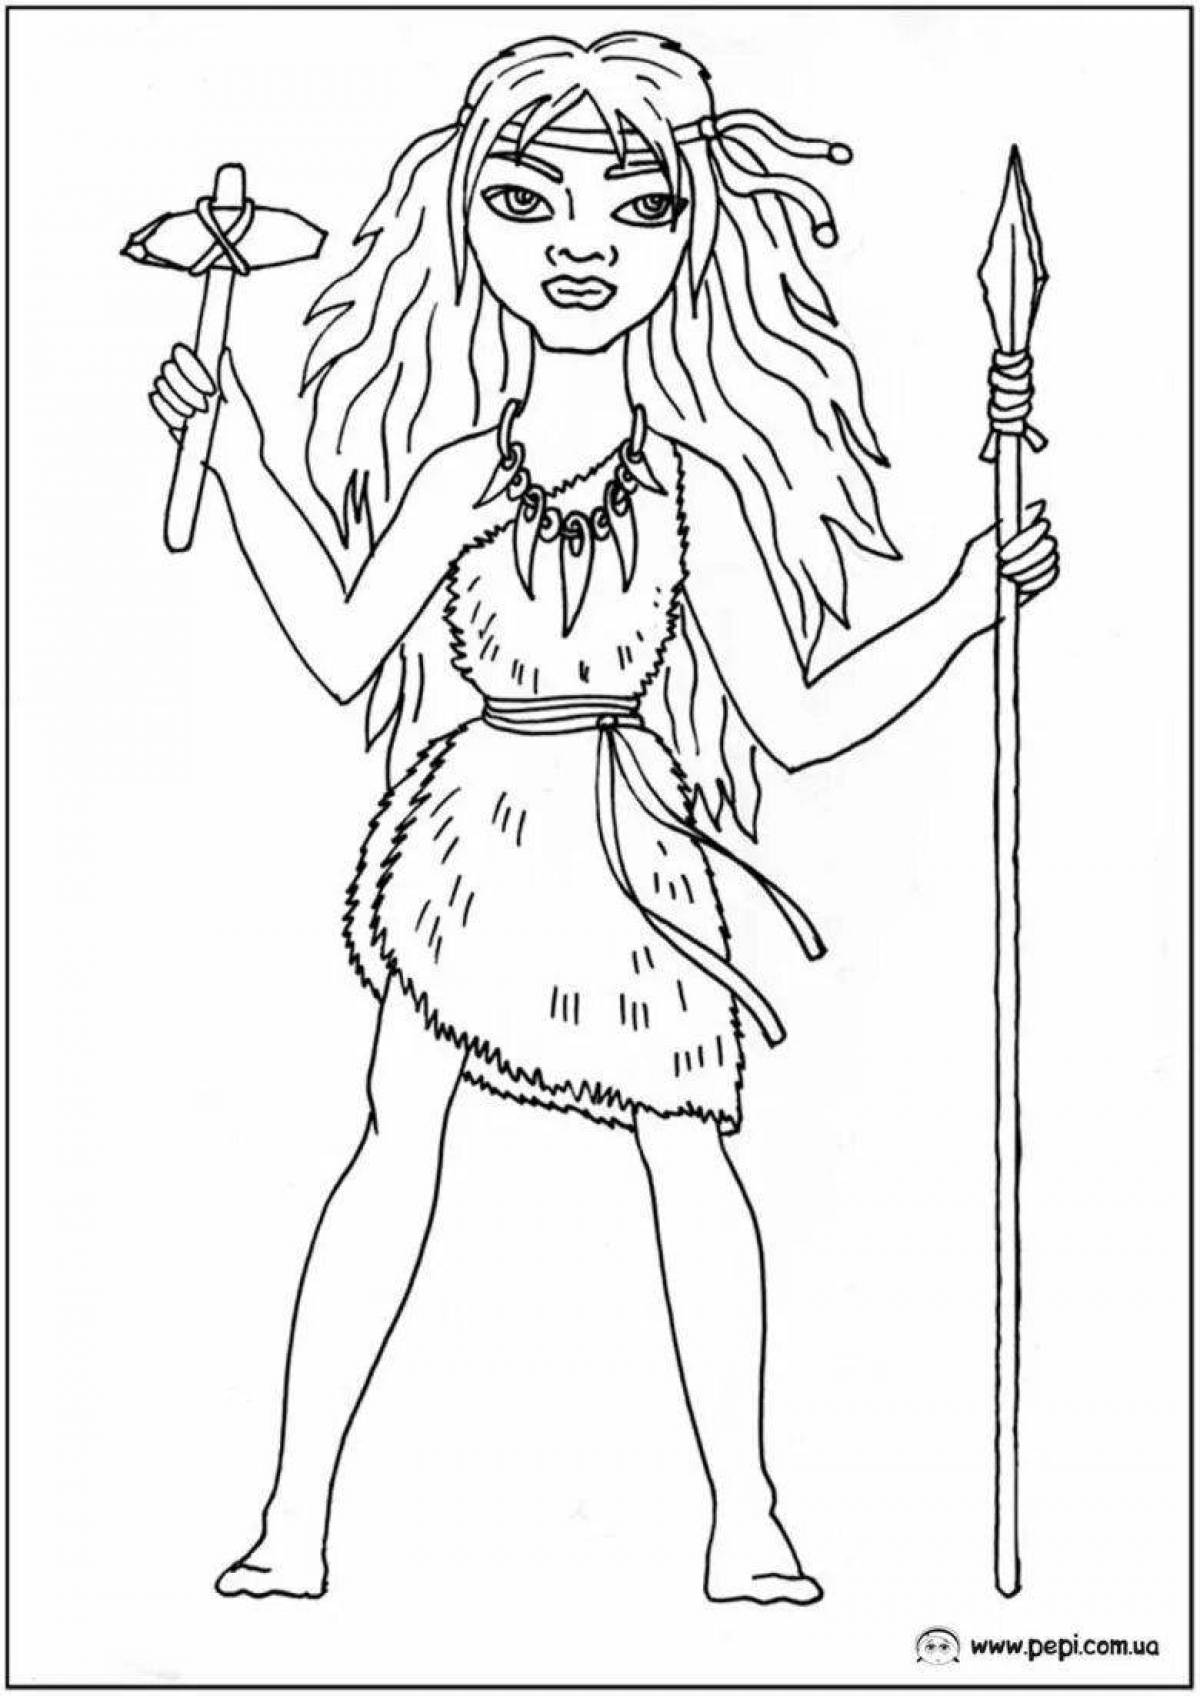 Vibrant stone age coloring page